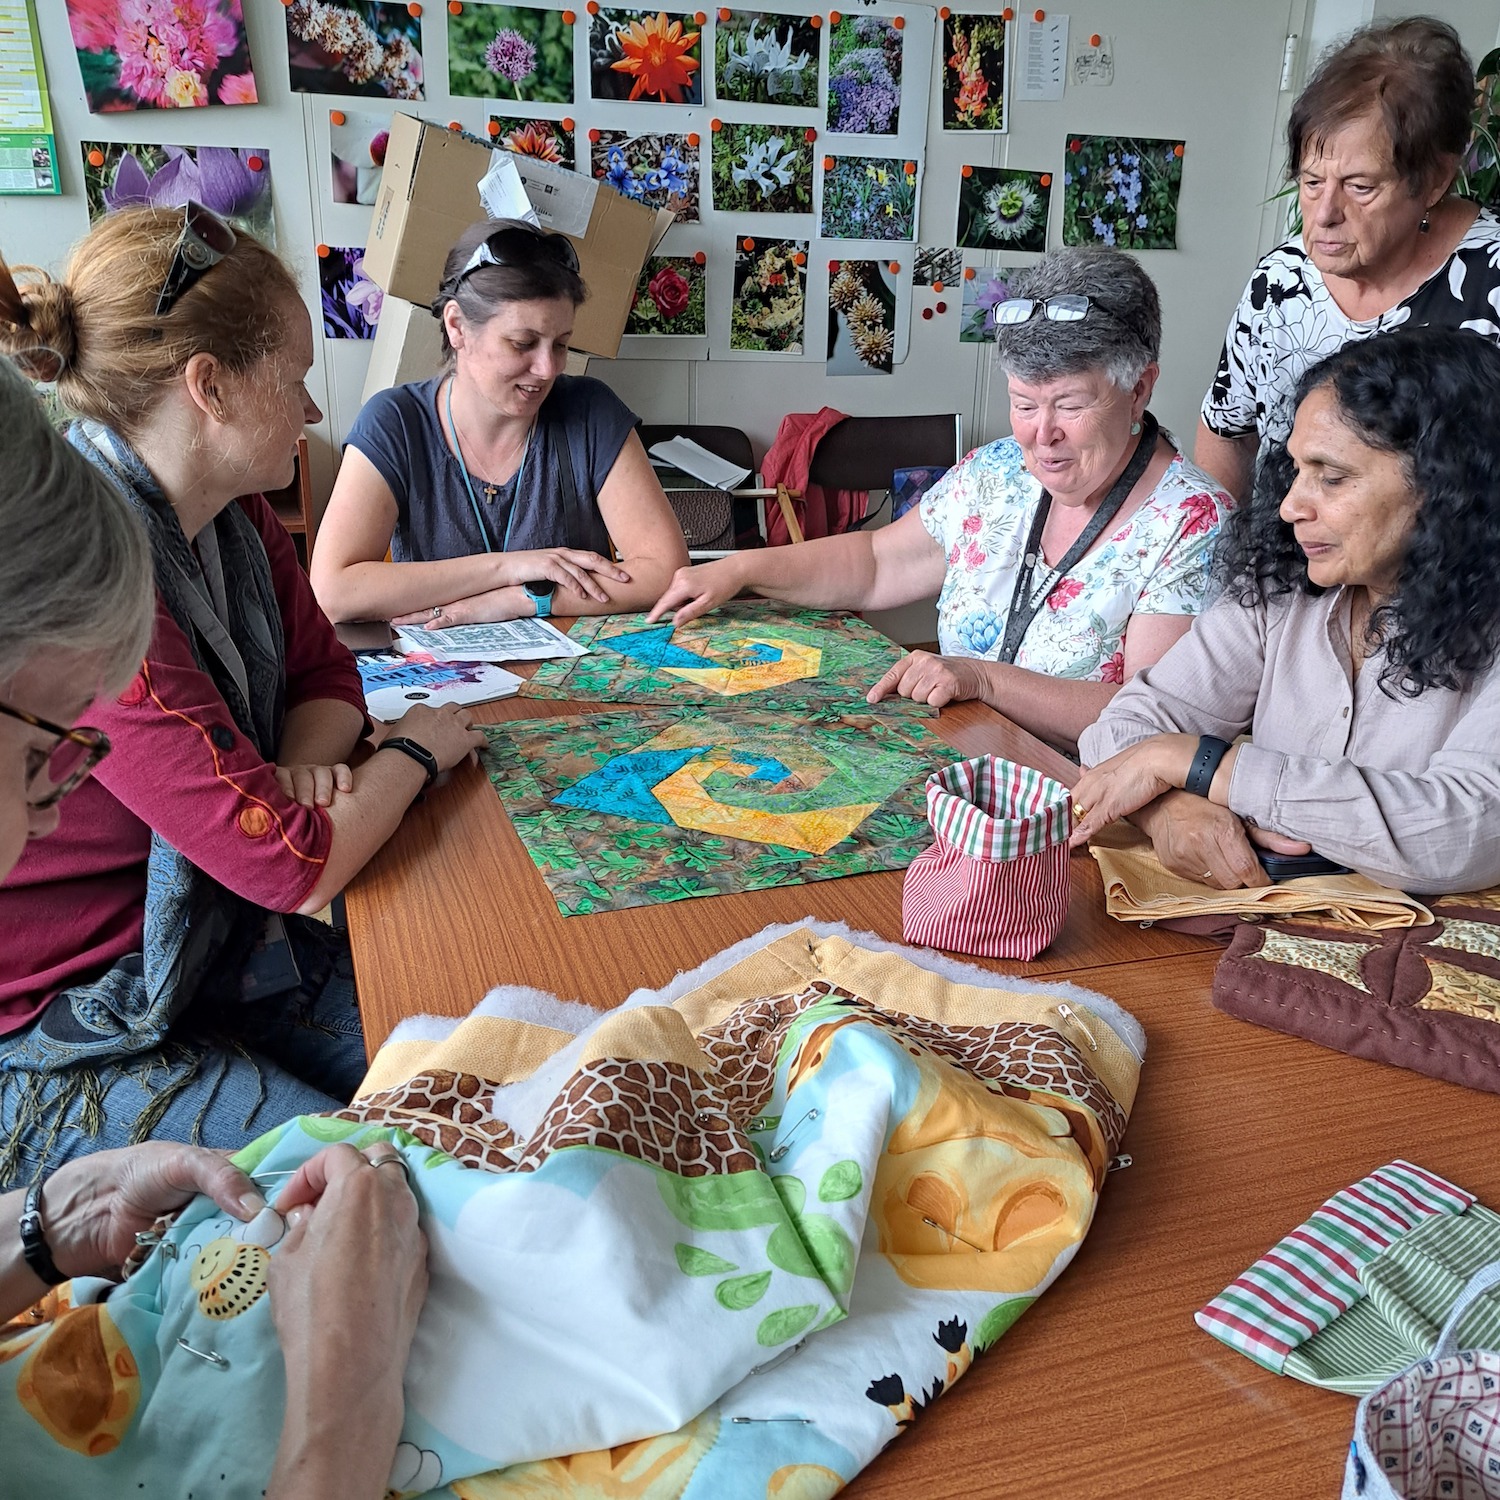 Join the ribbon embroidery group, quilting group, jewelry making or an origami folding class. Or take part in one of the workshops organized by the Kiosk. Share your talents and skill or start a new craft group.